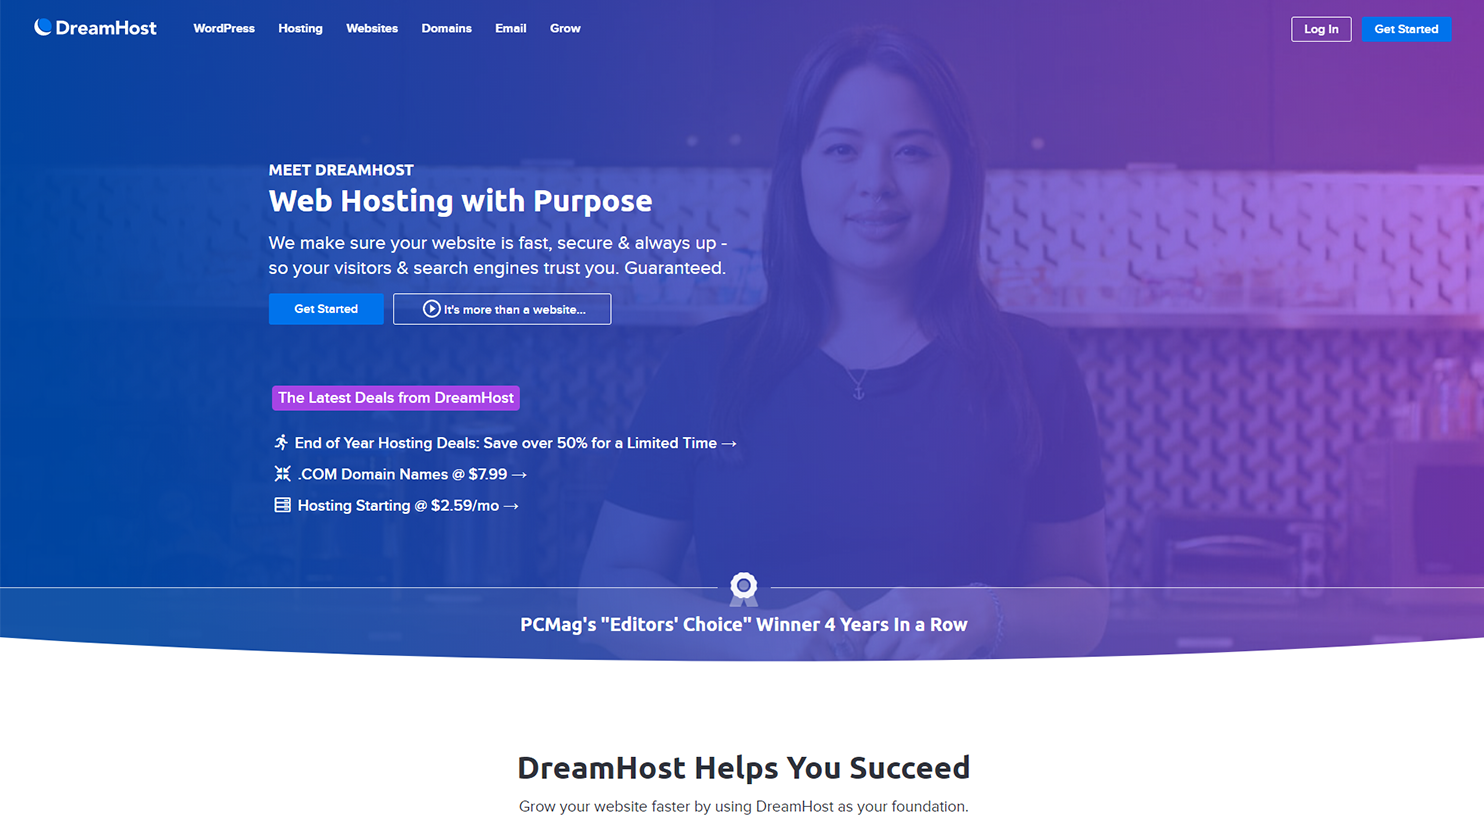 dreamhost review